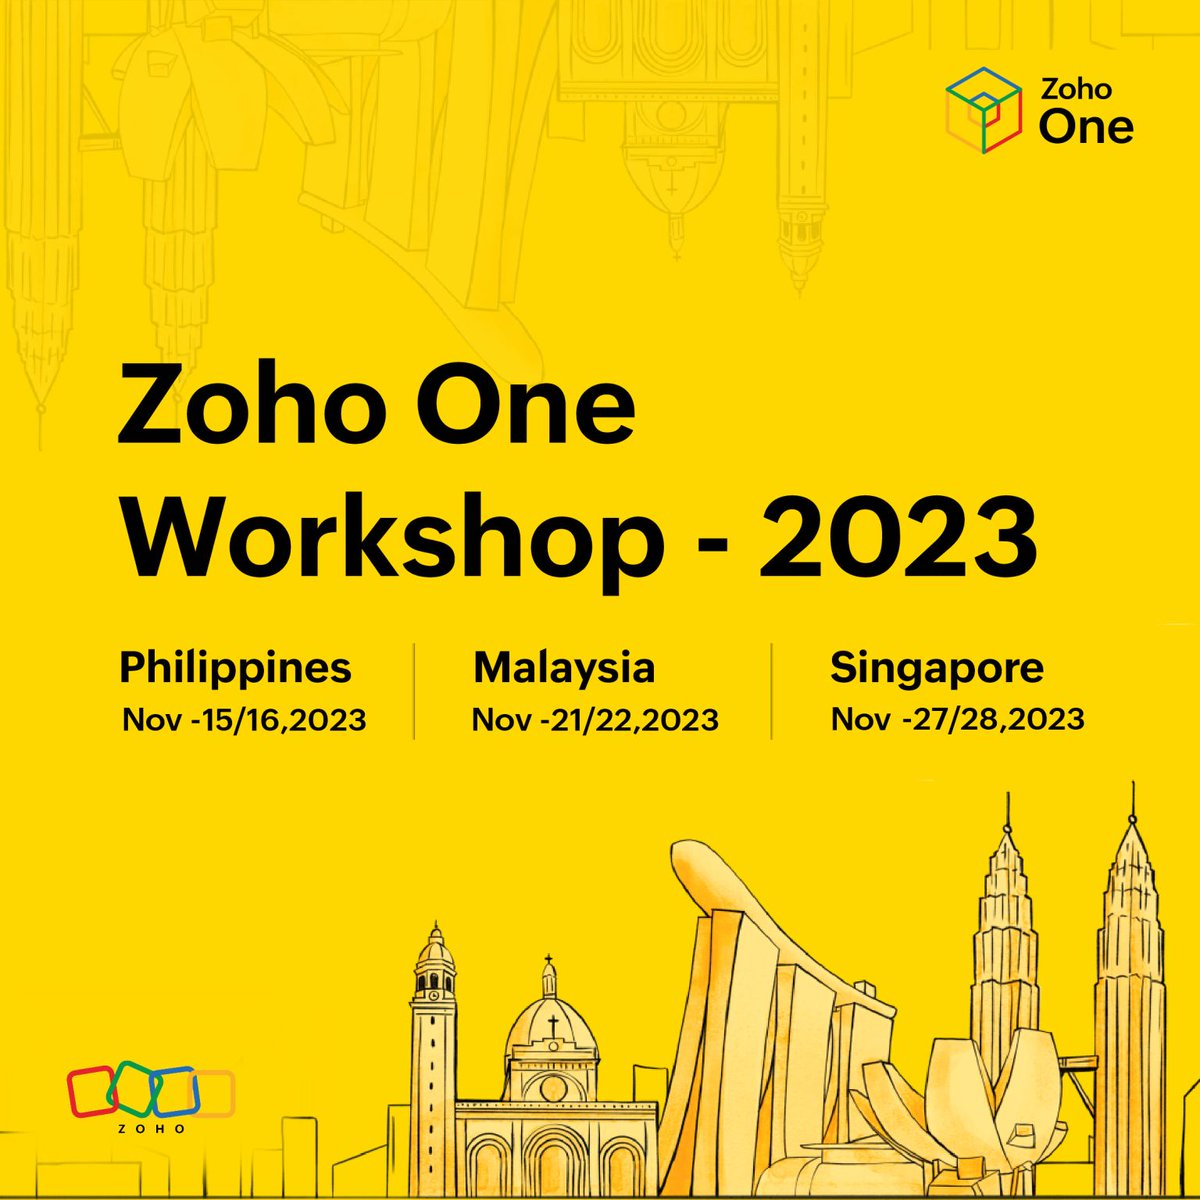 🚀 Join us for an immersive #ZohoOne Workshop! 🌟 

📅 Dates: 21st & 22nd November 2023 
 📍 Location: Le Méridien, Kuala Lumpur, Malaysia

Unlock the full potential of your business with hands-on sessions led by Zoho experts. Network, learn, and transform your business